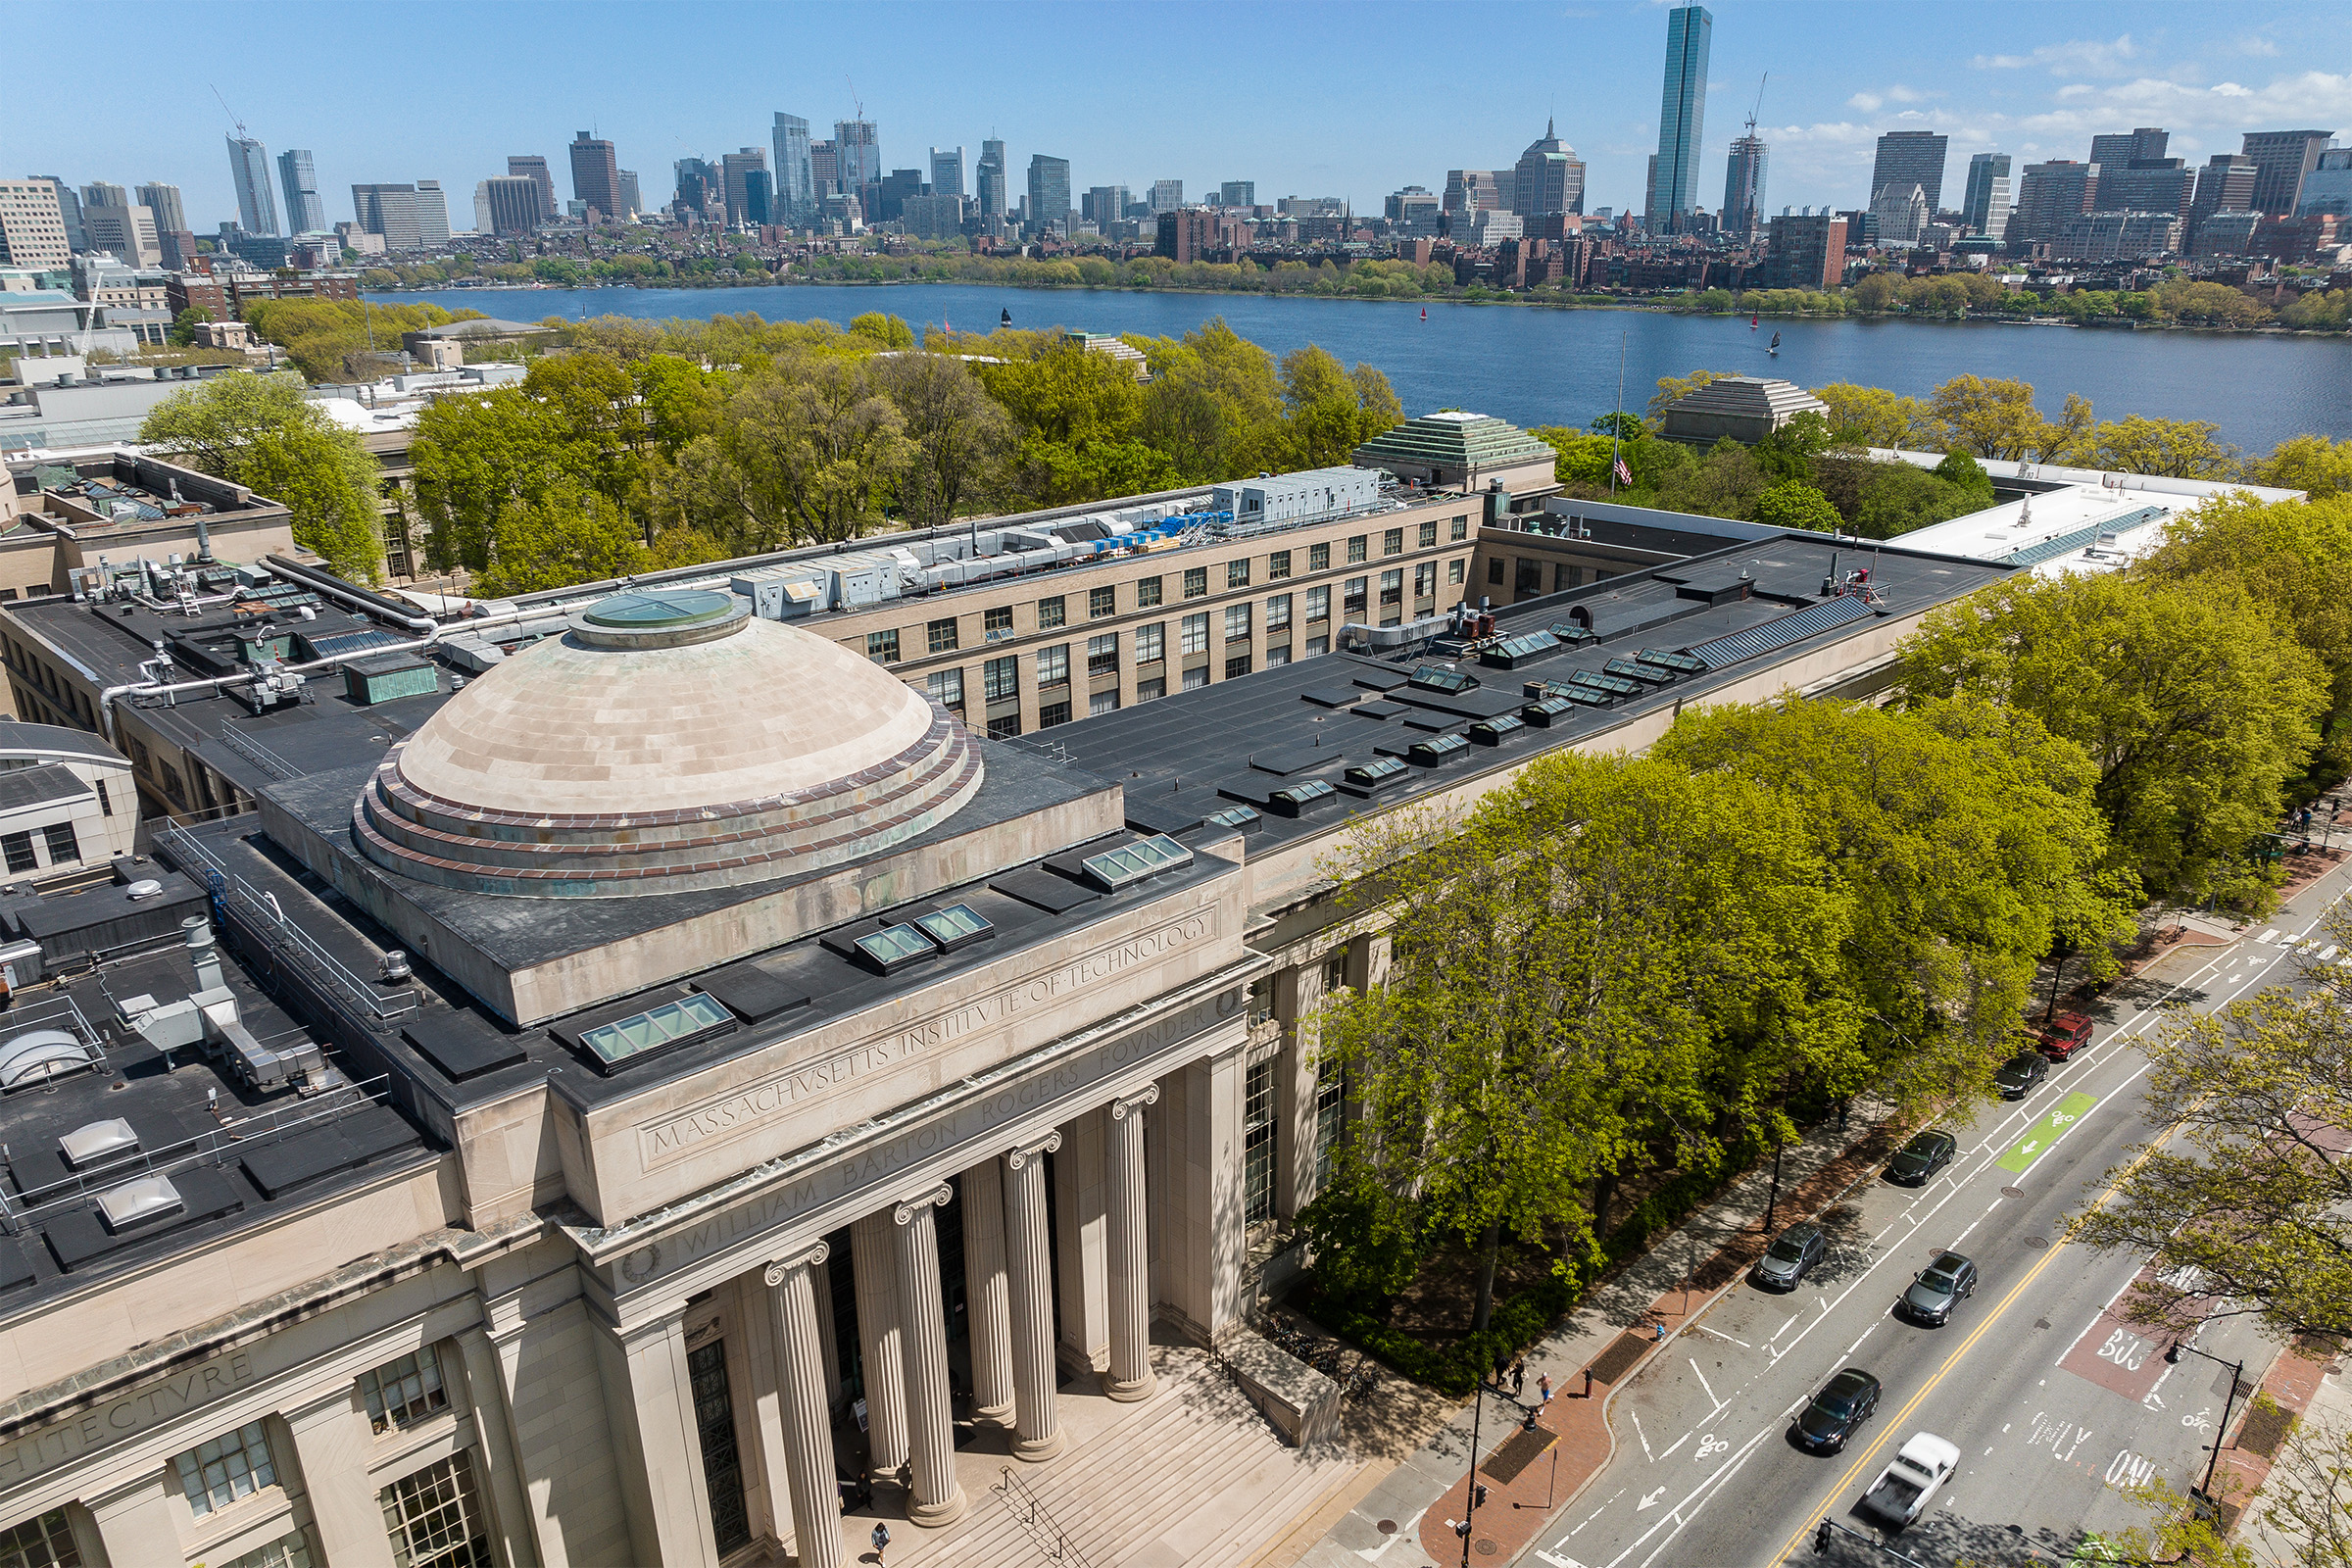 More than 1,200 MIT community members participated in a speaker series that tapped into students’ passion for entrepreneurship and social impact.